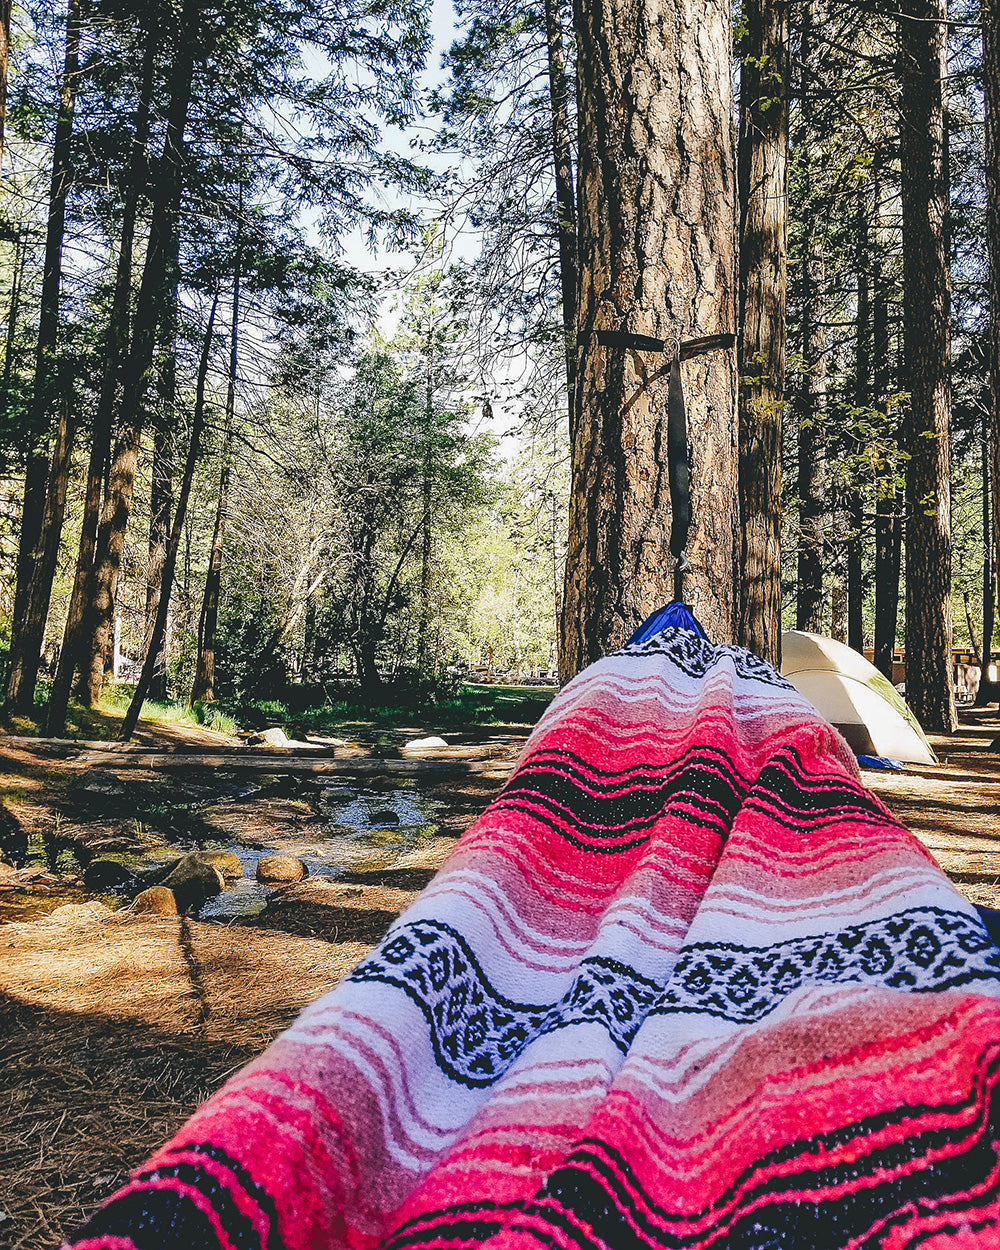 Relaxing in the hammock with a Bohemian Fiesta Blanket is our favorite way to spend time while camping when we aren't out exploring the trails. Lucky we had such a good spot to relax in Yosemite on our last trip.